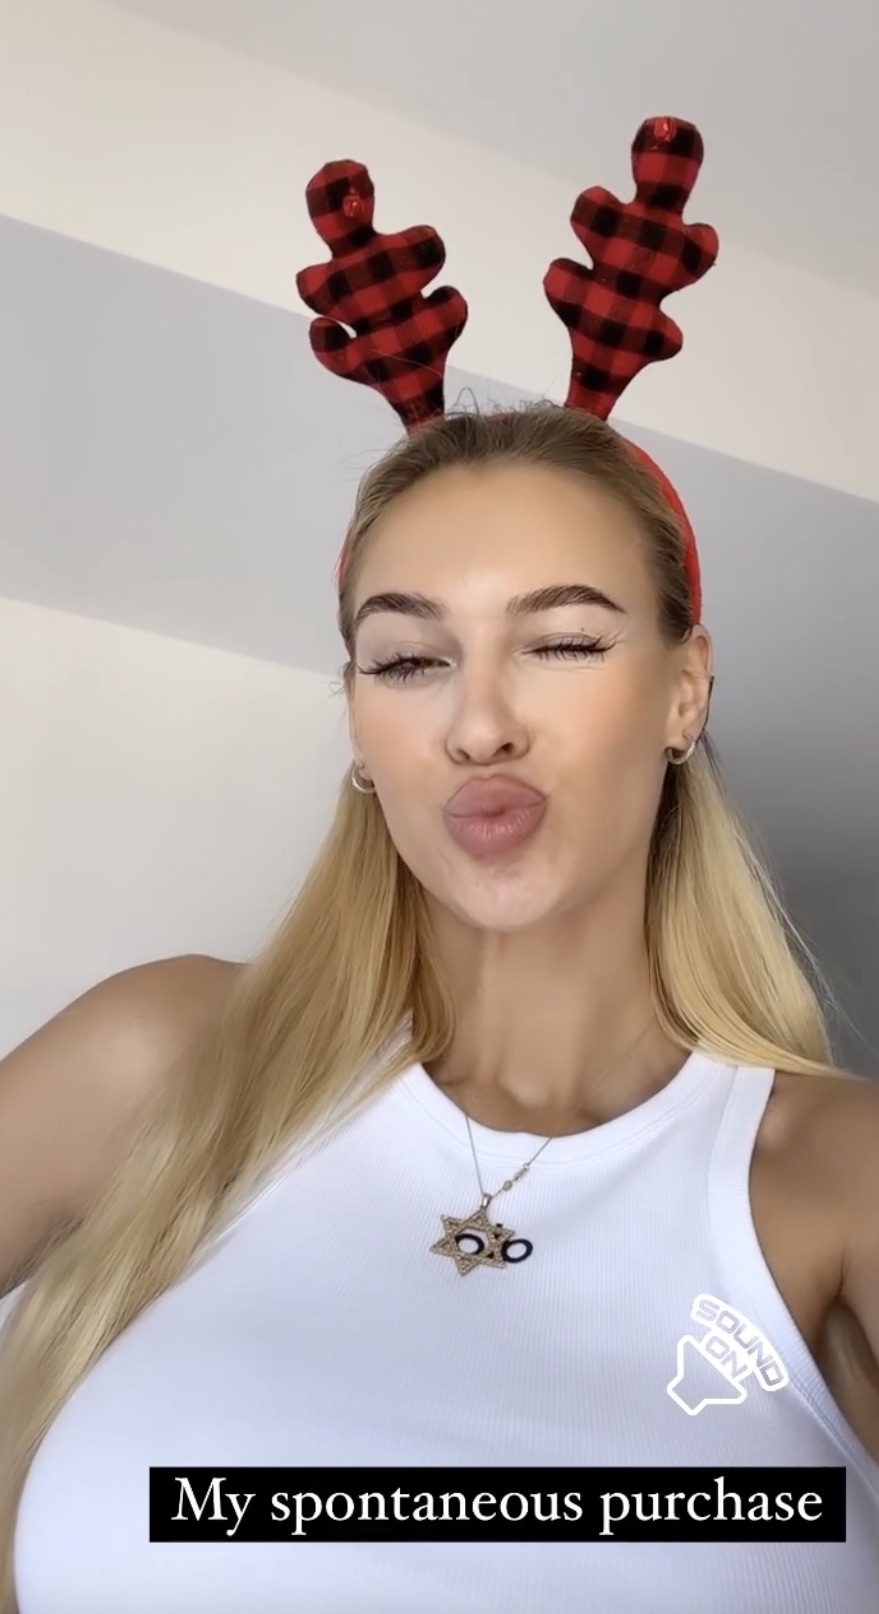 The 27-year-old model rocked a pair of reindeer antlers during the viral clip